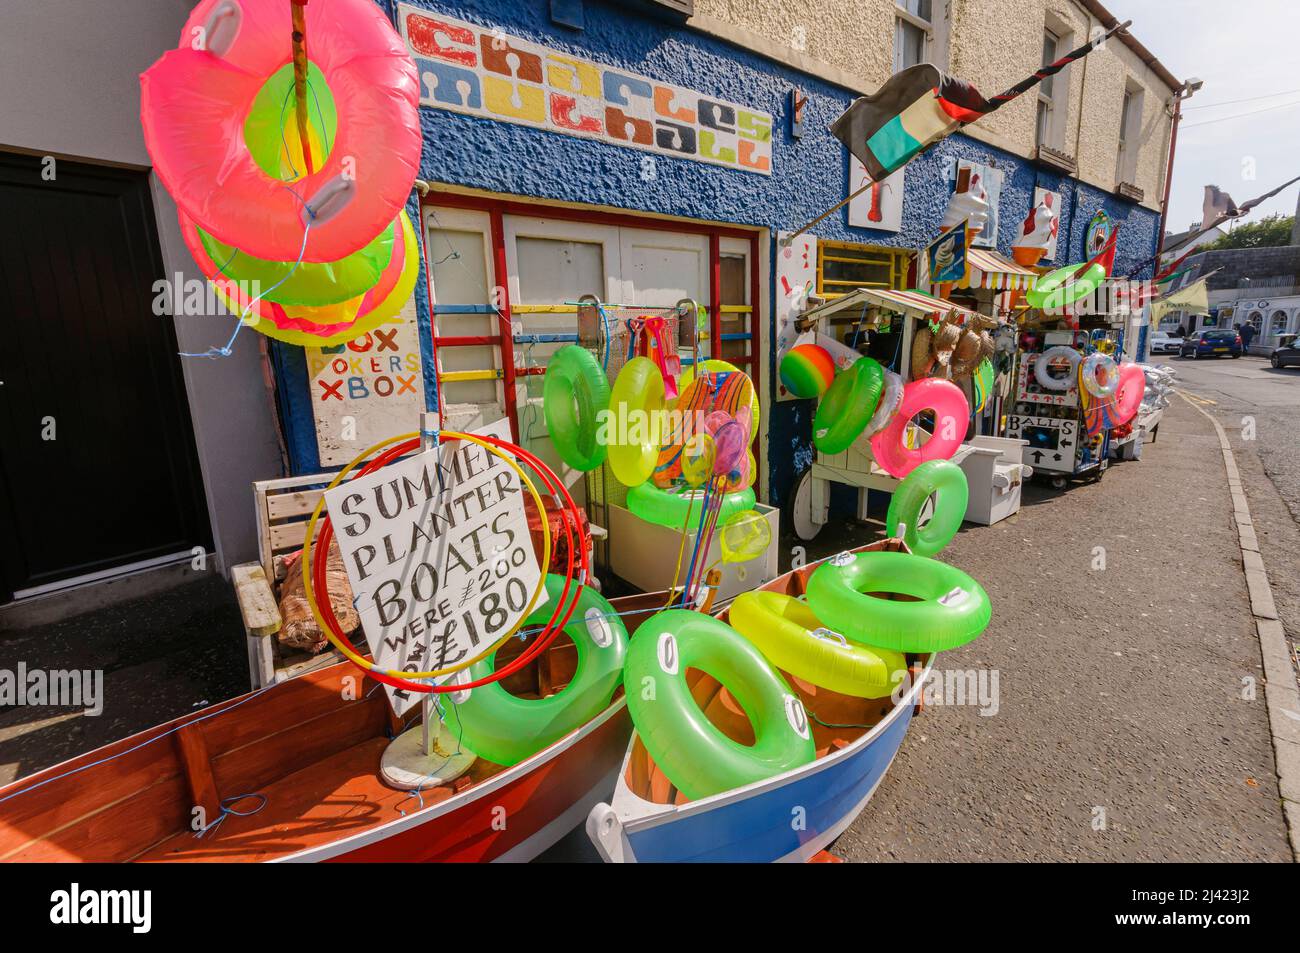 Traditional seaside shop selling beach toys Stock Photo